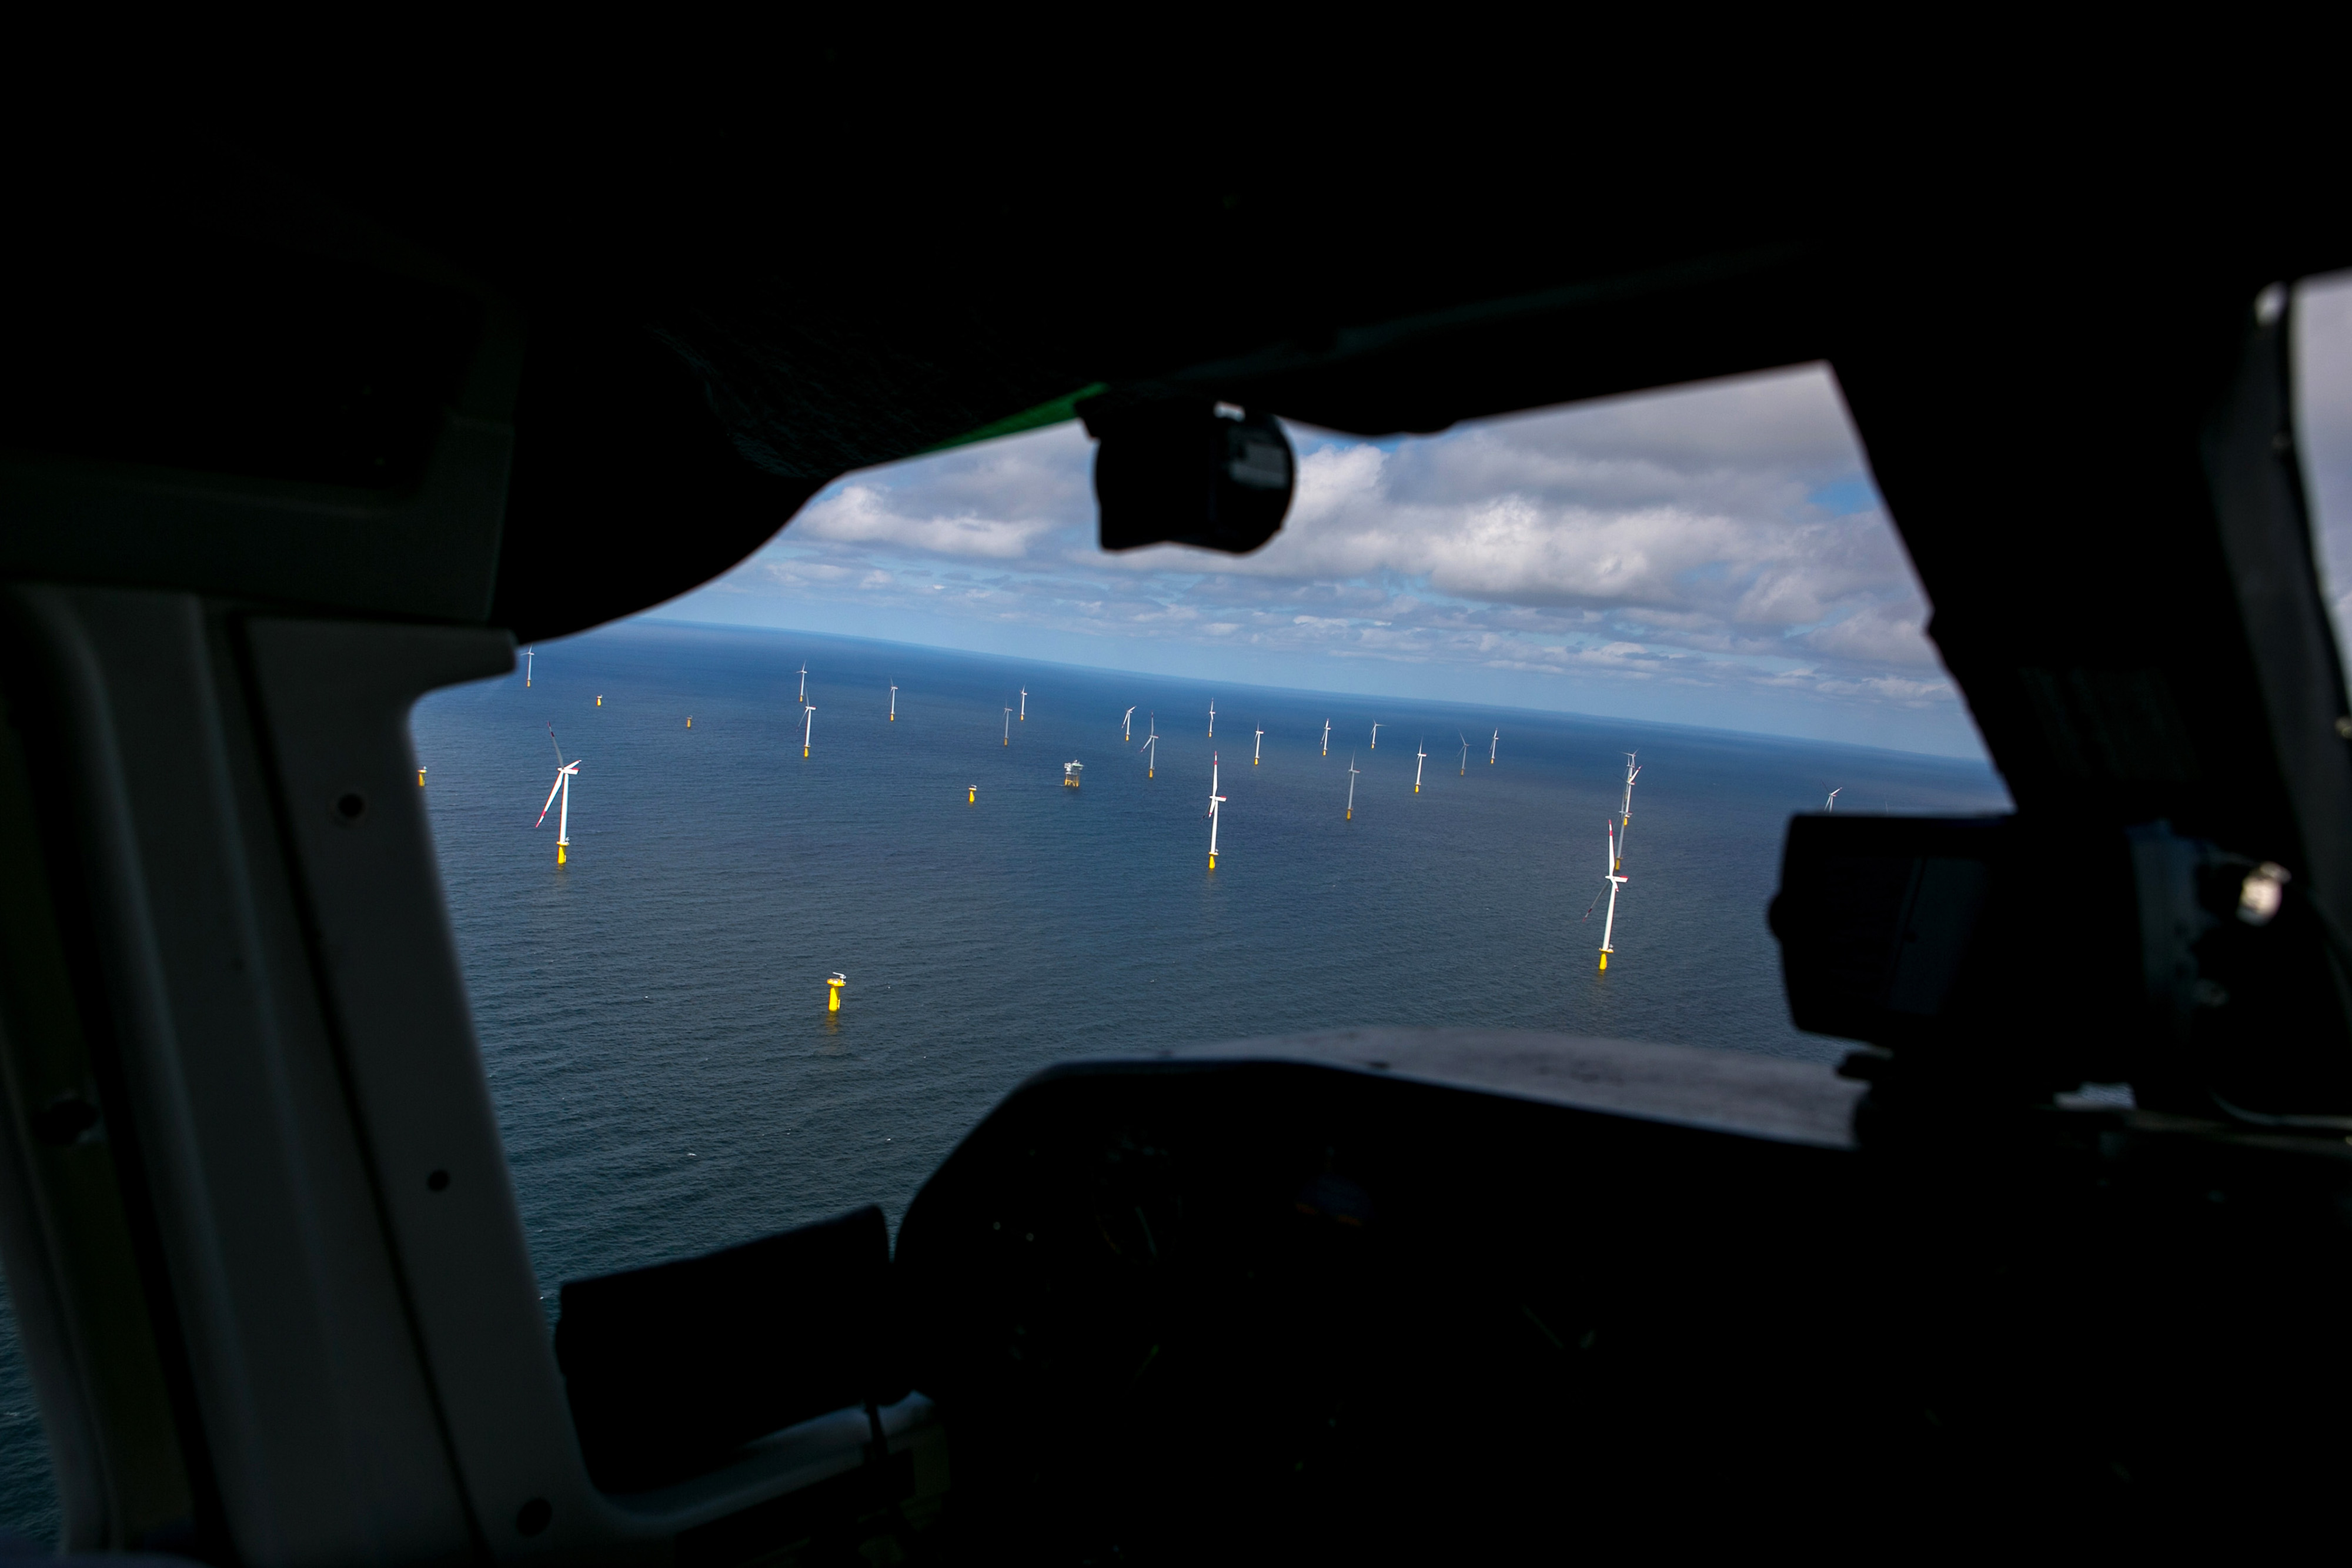 Wind turbines stand in the North Sea off the coast of the Heligoland archipelago in Germany.